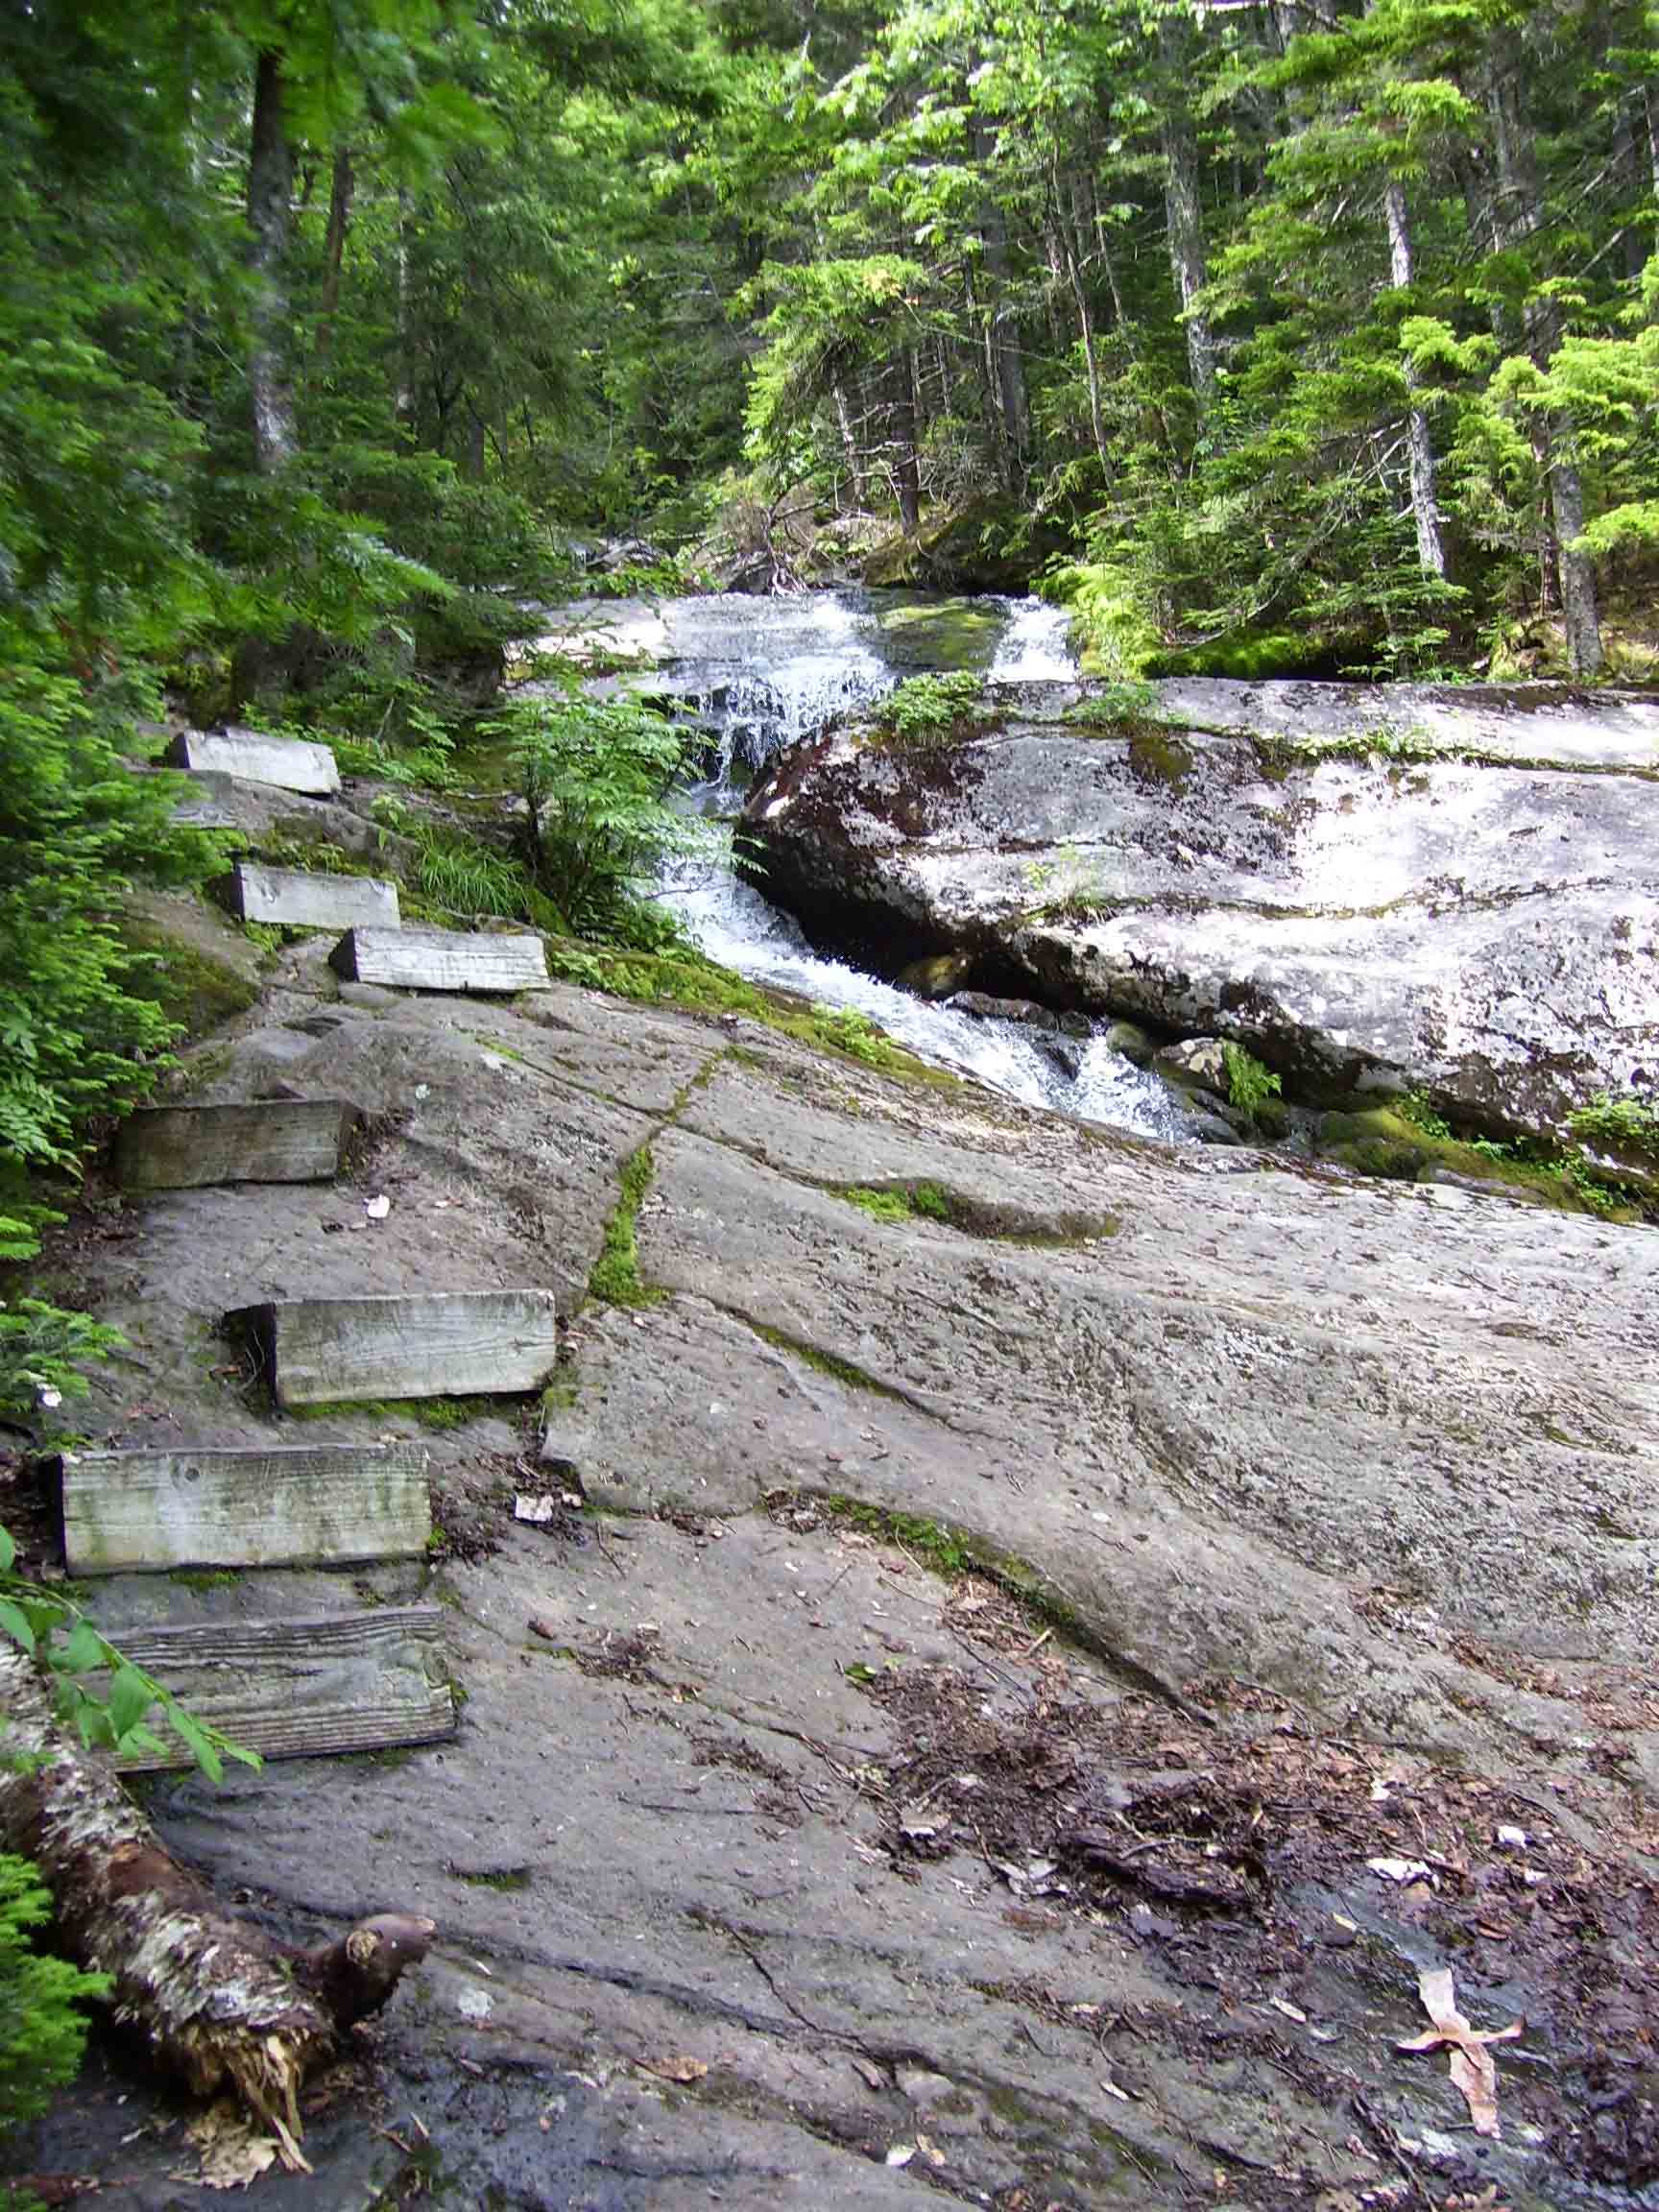 There are many of these wooden steps bolted into the rock along the trail. This is probably one of the less steep portions where they are found. In places there are is also rebar to use for handholds.   Courtesy dlcul@conncoll.edu